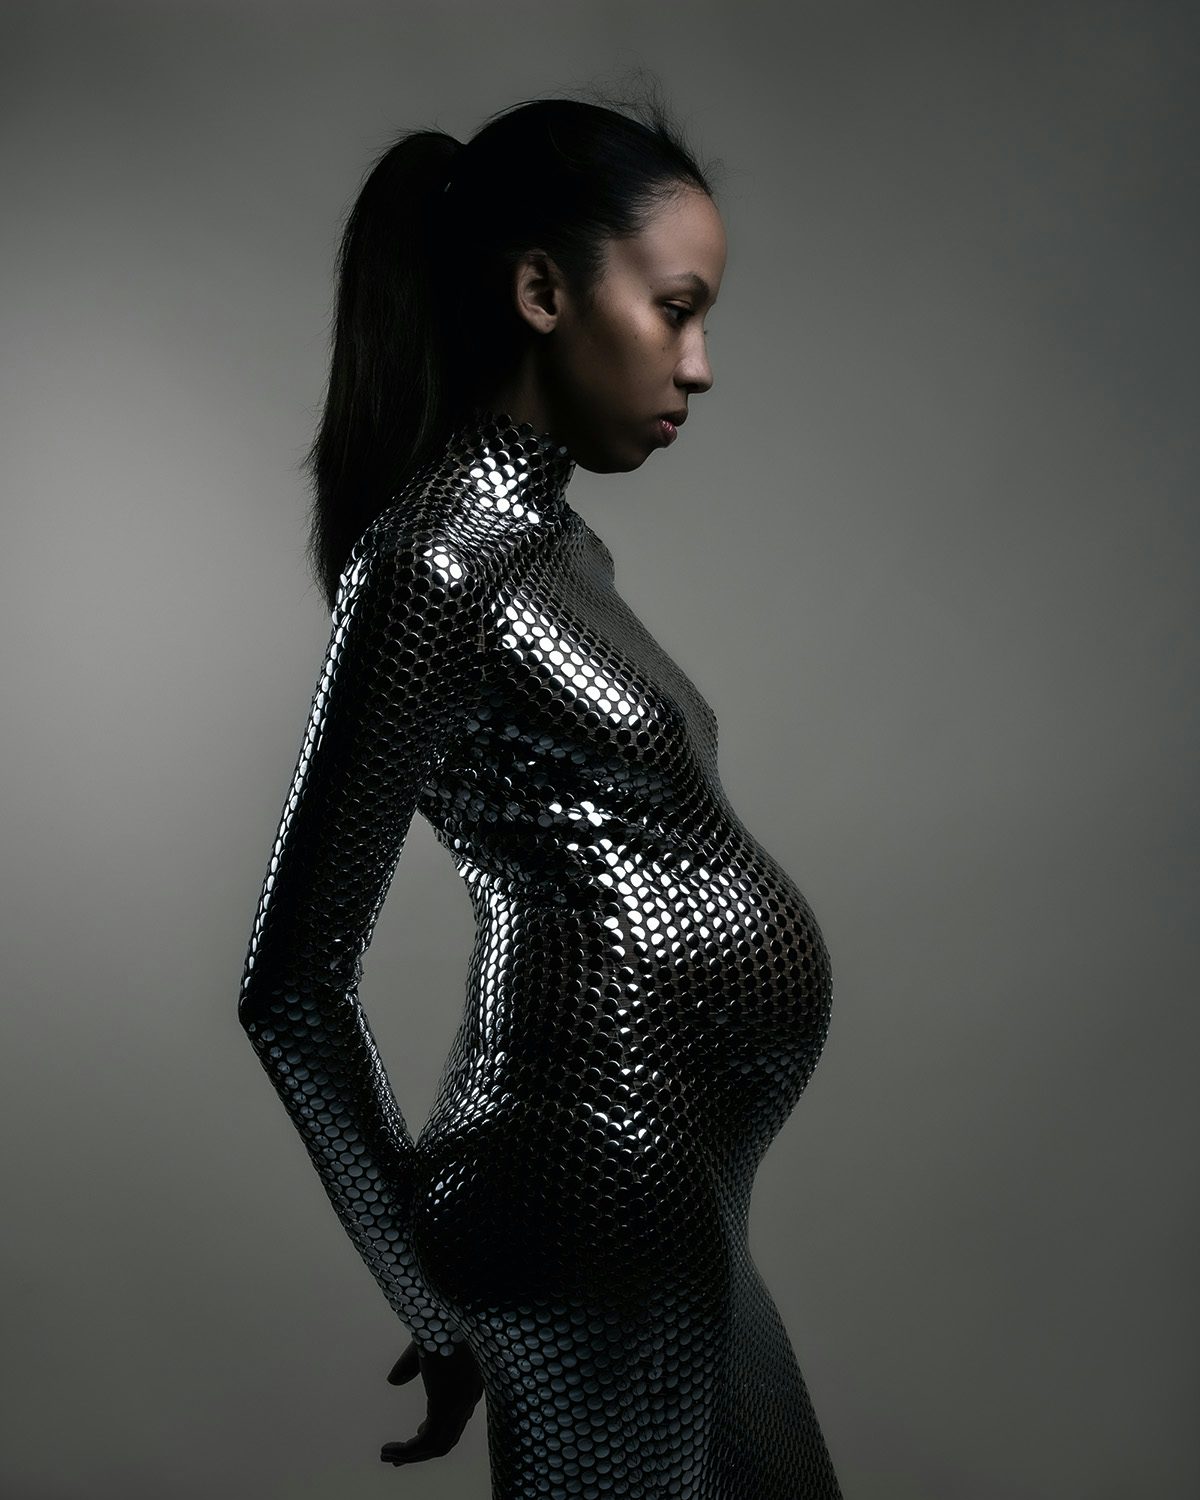 Image by Jet Swan showing a woman with a baby bump wearing a tight, glittery outfit